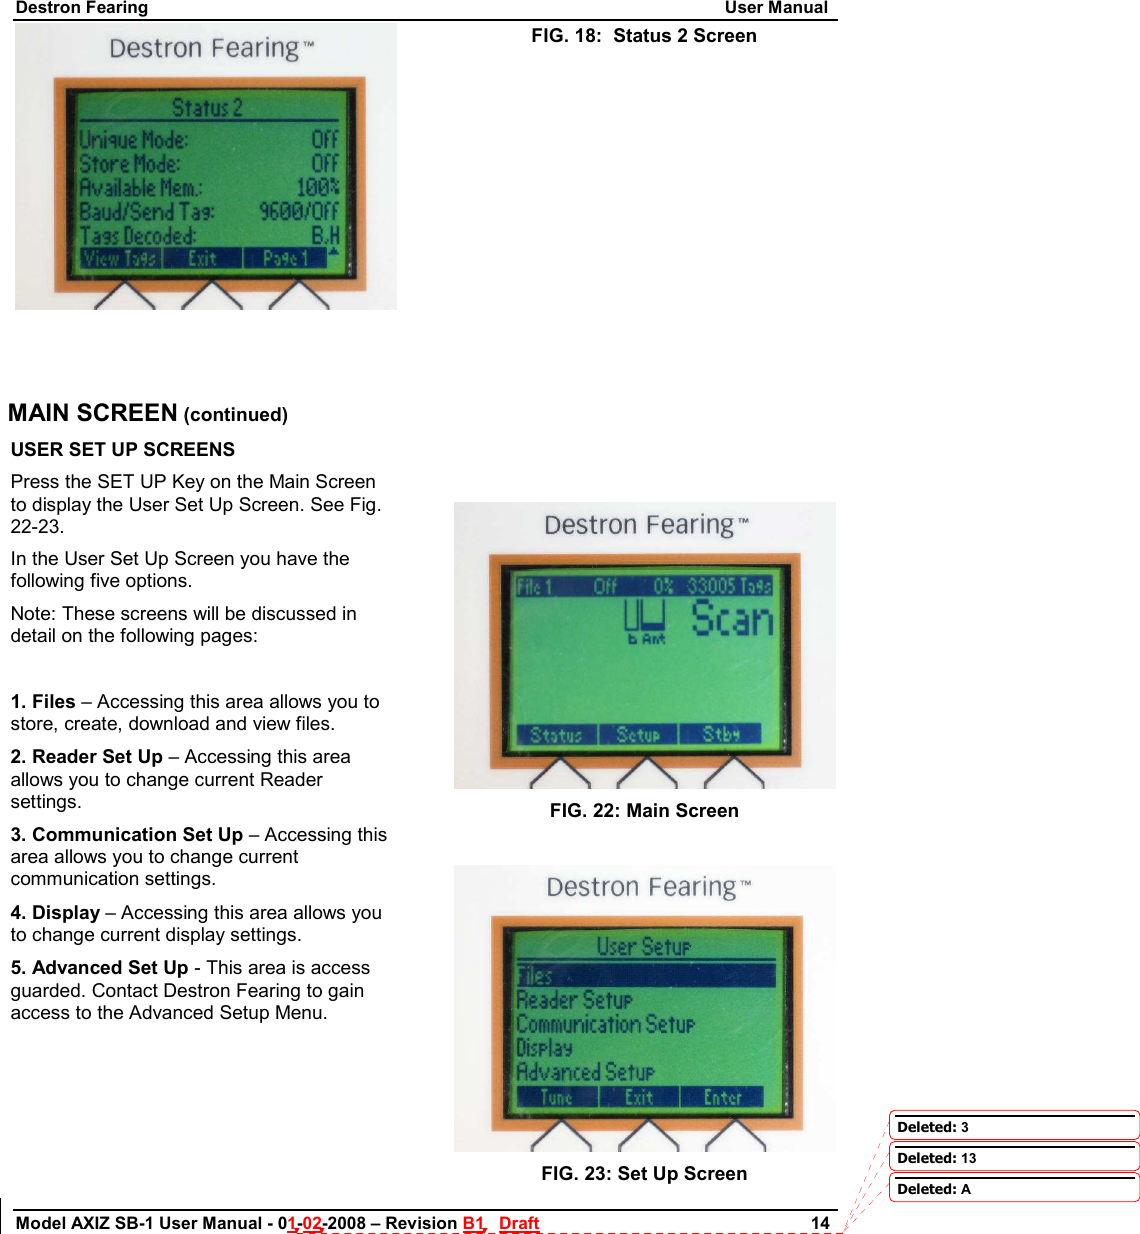 Destron Fearing                                                                                                                        User Manual Model AXIZ SB-1 User Manual - 01-02-2008 – Revision B1   Draft                        14   FIG. 18:  Status 2 Screen     MAIN SCREEN (continued) USER SET UP SCREENS Press the SET UP Key on the Main Screen to display the User Set Up Screen. See Fig. 22-23.  In the User Set Up Screen you have the following five options.  Note: These screens will be discussed in detail on the following pages:   1. Files – Accessing this area allows you to store, create, download and view files.  2. Reader Set Up – Accessing this area allows you to change current Reader settings. 3. Communication Set Up – Accessing this area allows you to change current communication settings. 4. Display – Accessing this area allows you to change current display settings. 5. Advanced Set Up - This area is access guarded. Contact Destron Fearing to gain access to the Advanced Setup Menu.            FIG. 22: Main Screen   FIG. 23: Set Up Screen Deleted: 3Deleted: 13Deleted: A